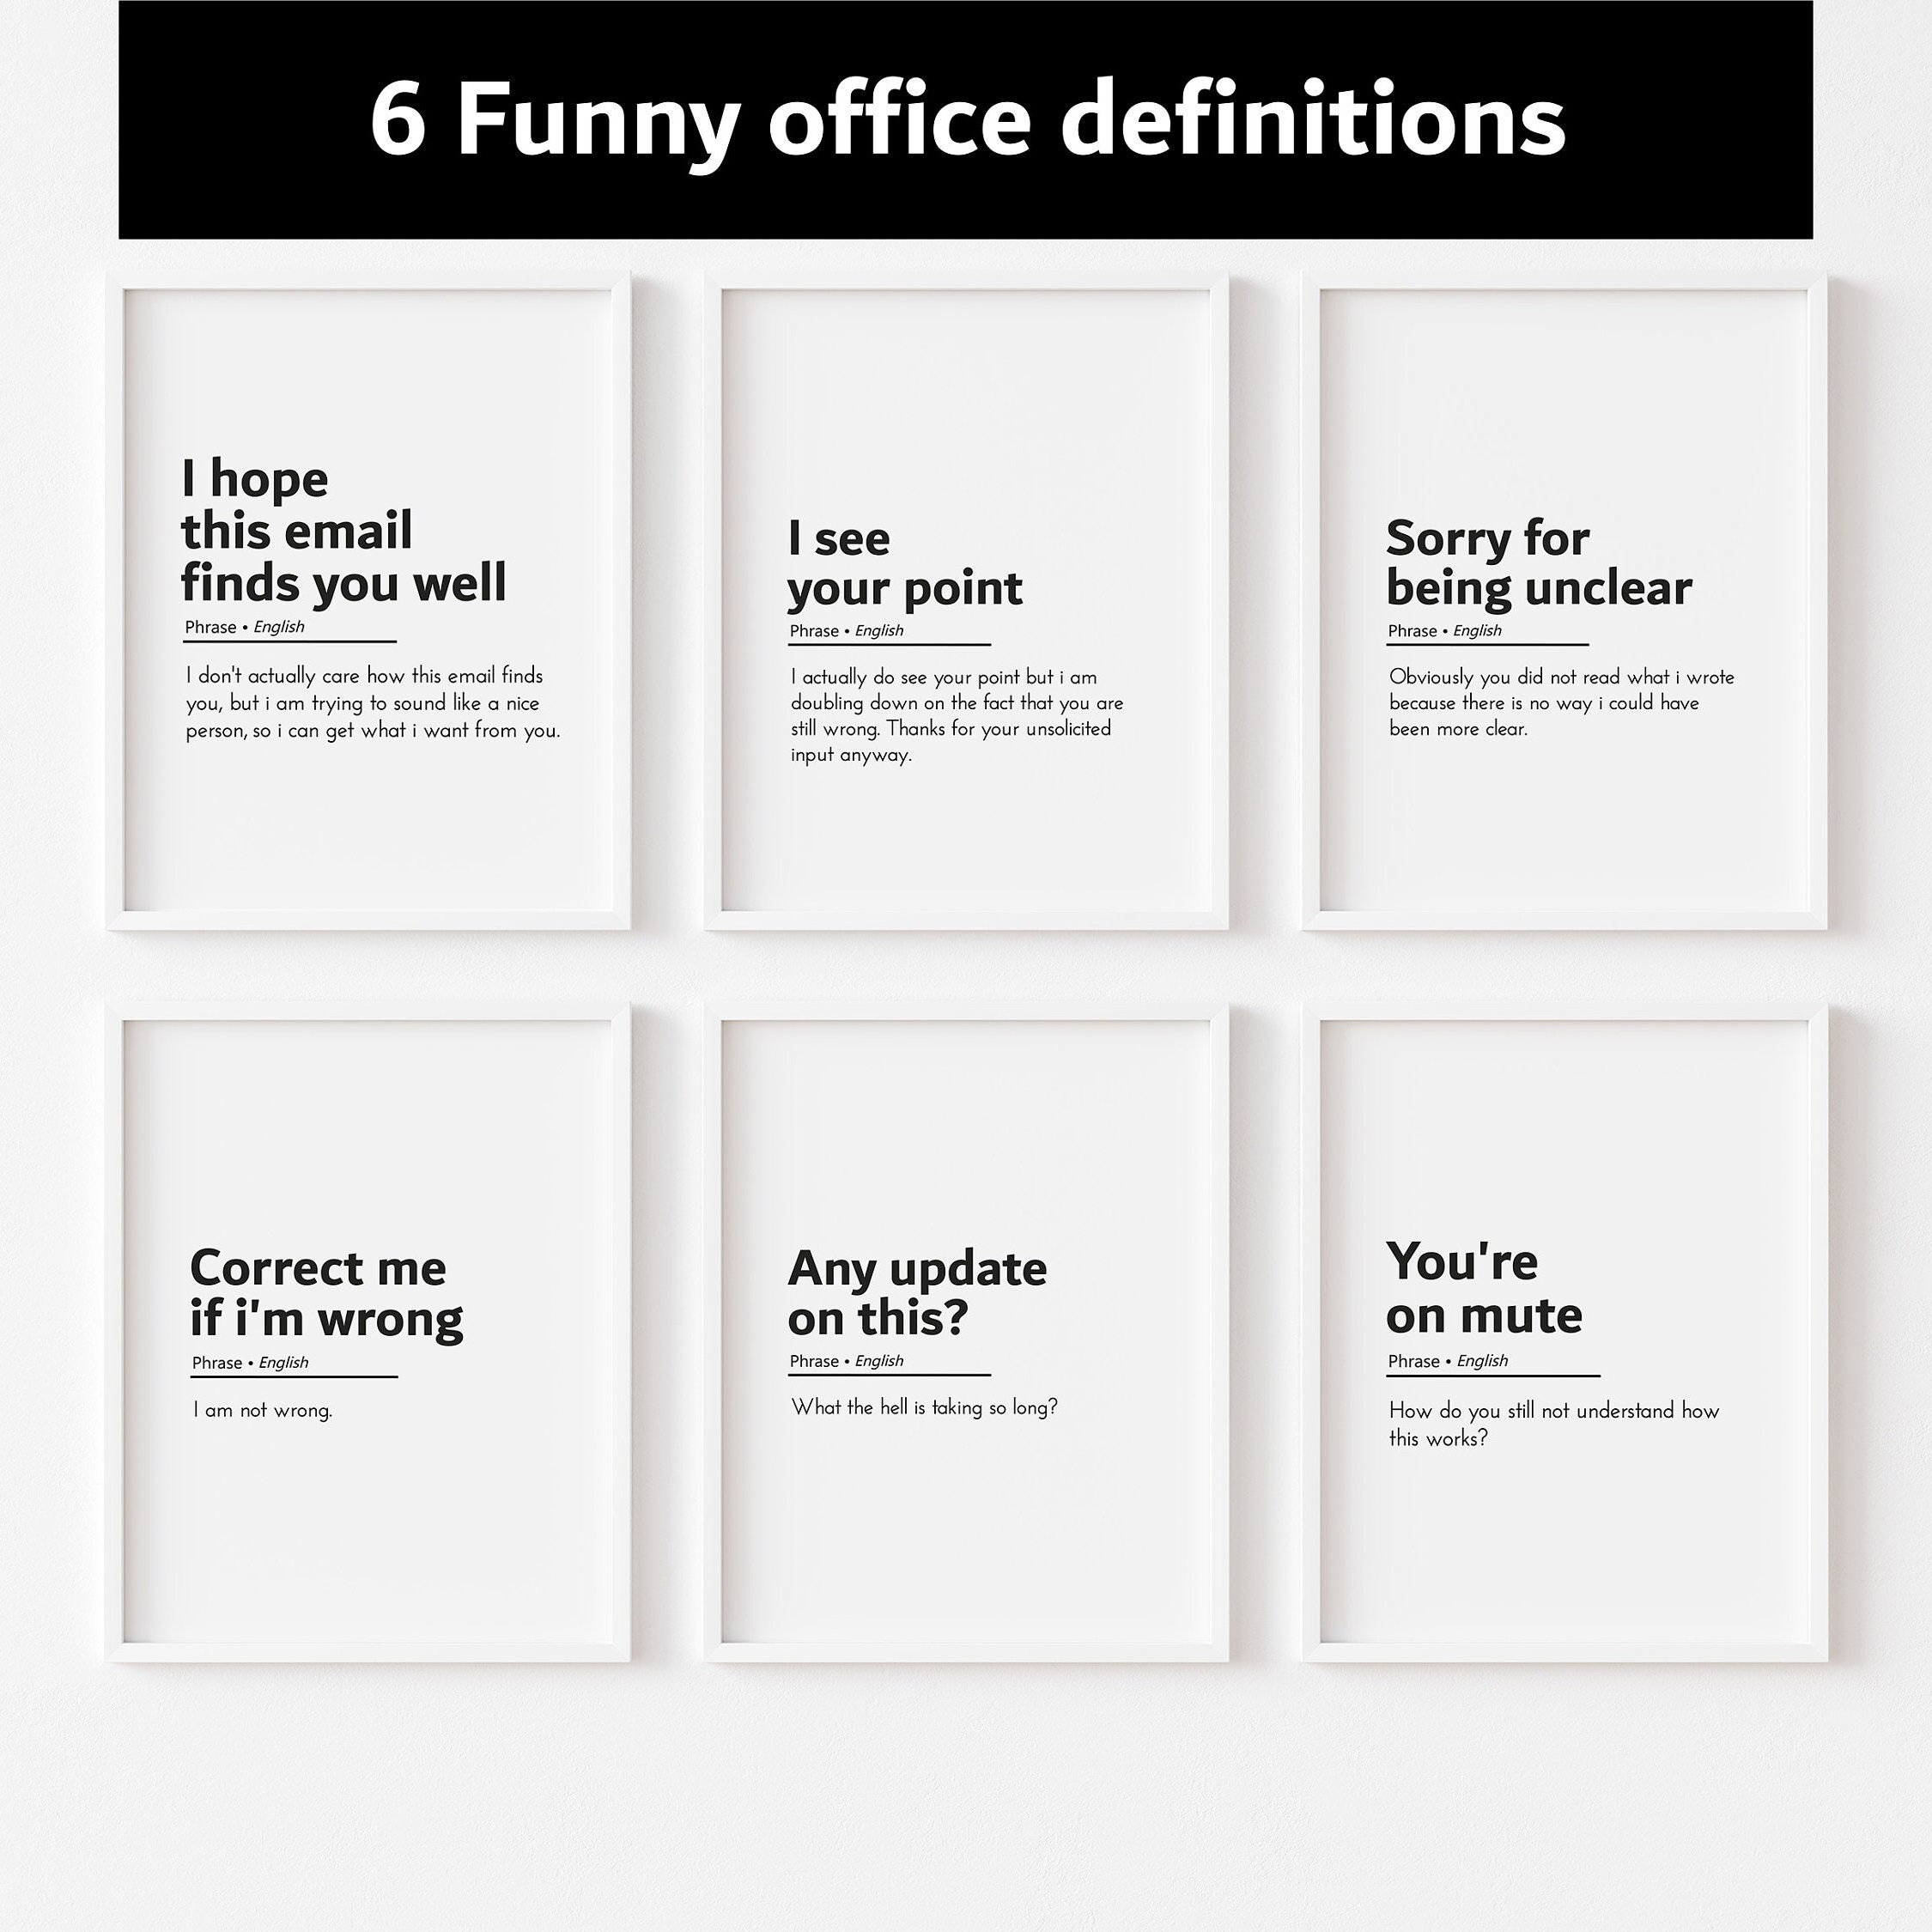  Pigort Office Desk Decor - Working Hard/Hardly Working-Funny Desk  Accessories For Work - Black and White Farmhouse Cubicle Home Office Desk  Sign - Aesthetic Gifts and Supplies for Coworkers : Office